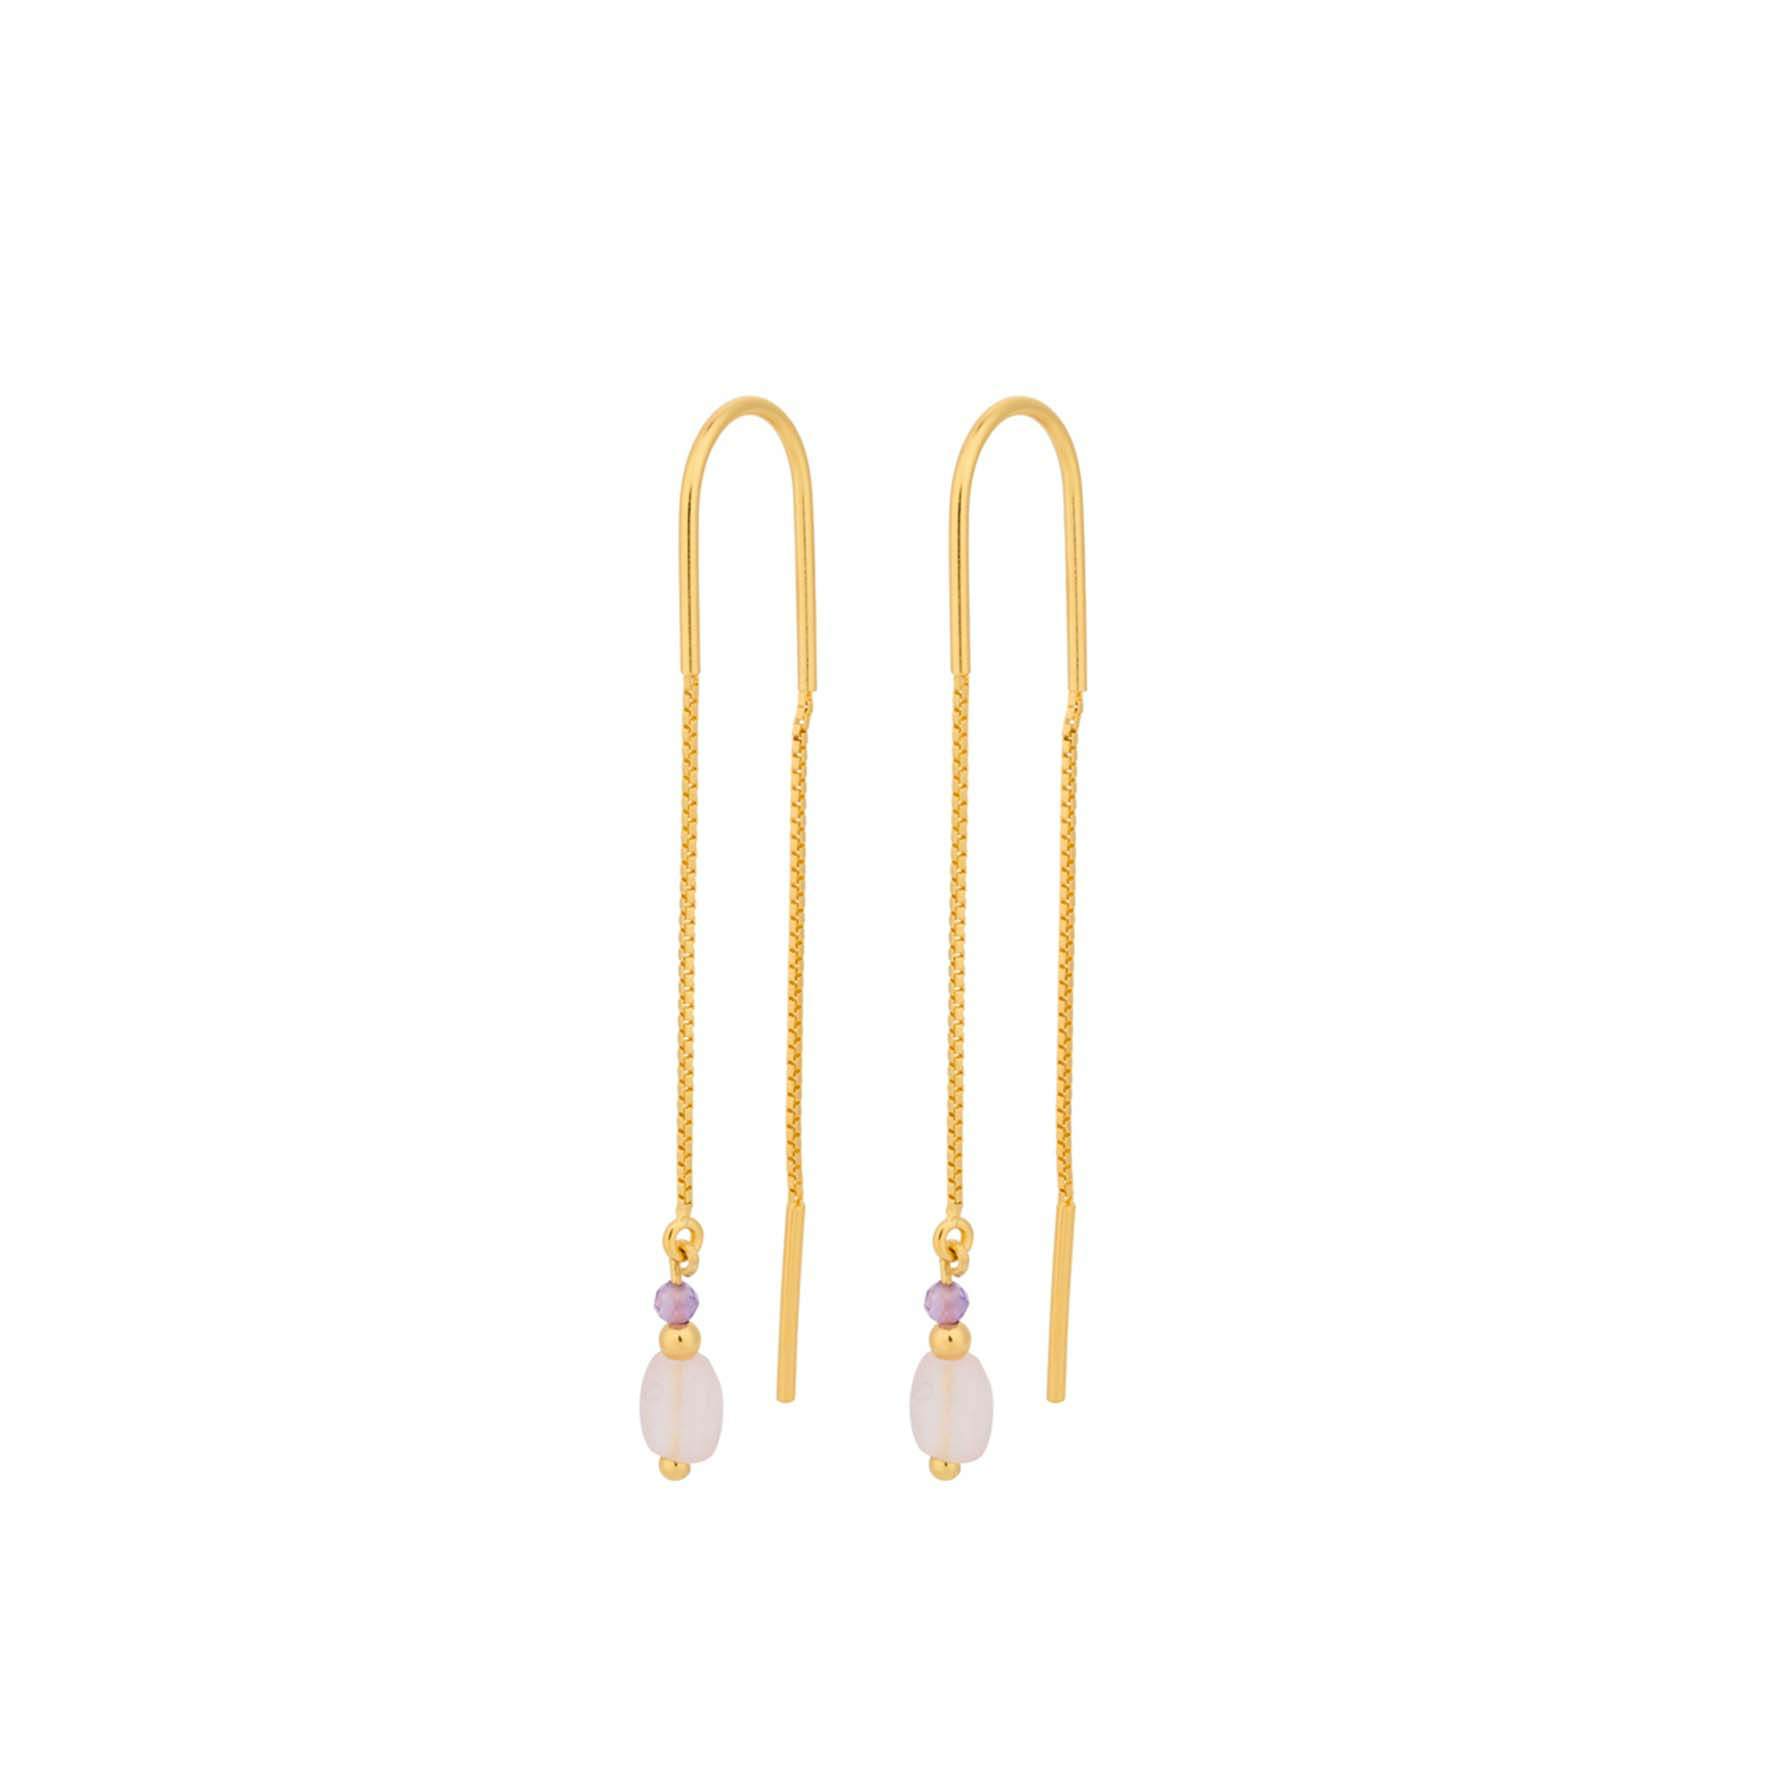 Cloudy Rose Earchains from Pernille Corydon in Goldplated-Silver Sterling 925